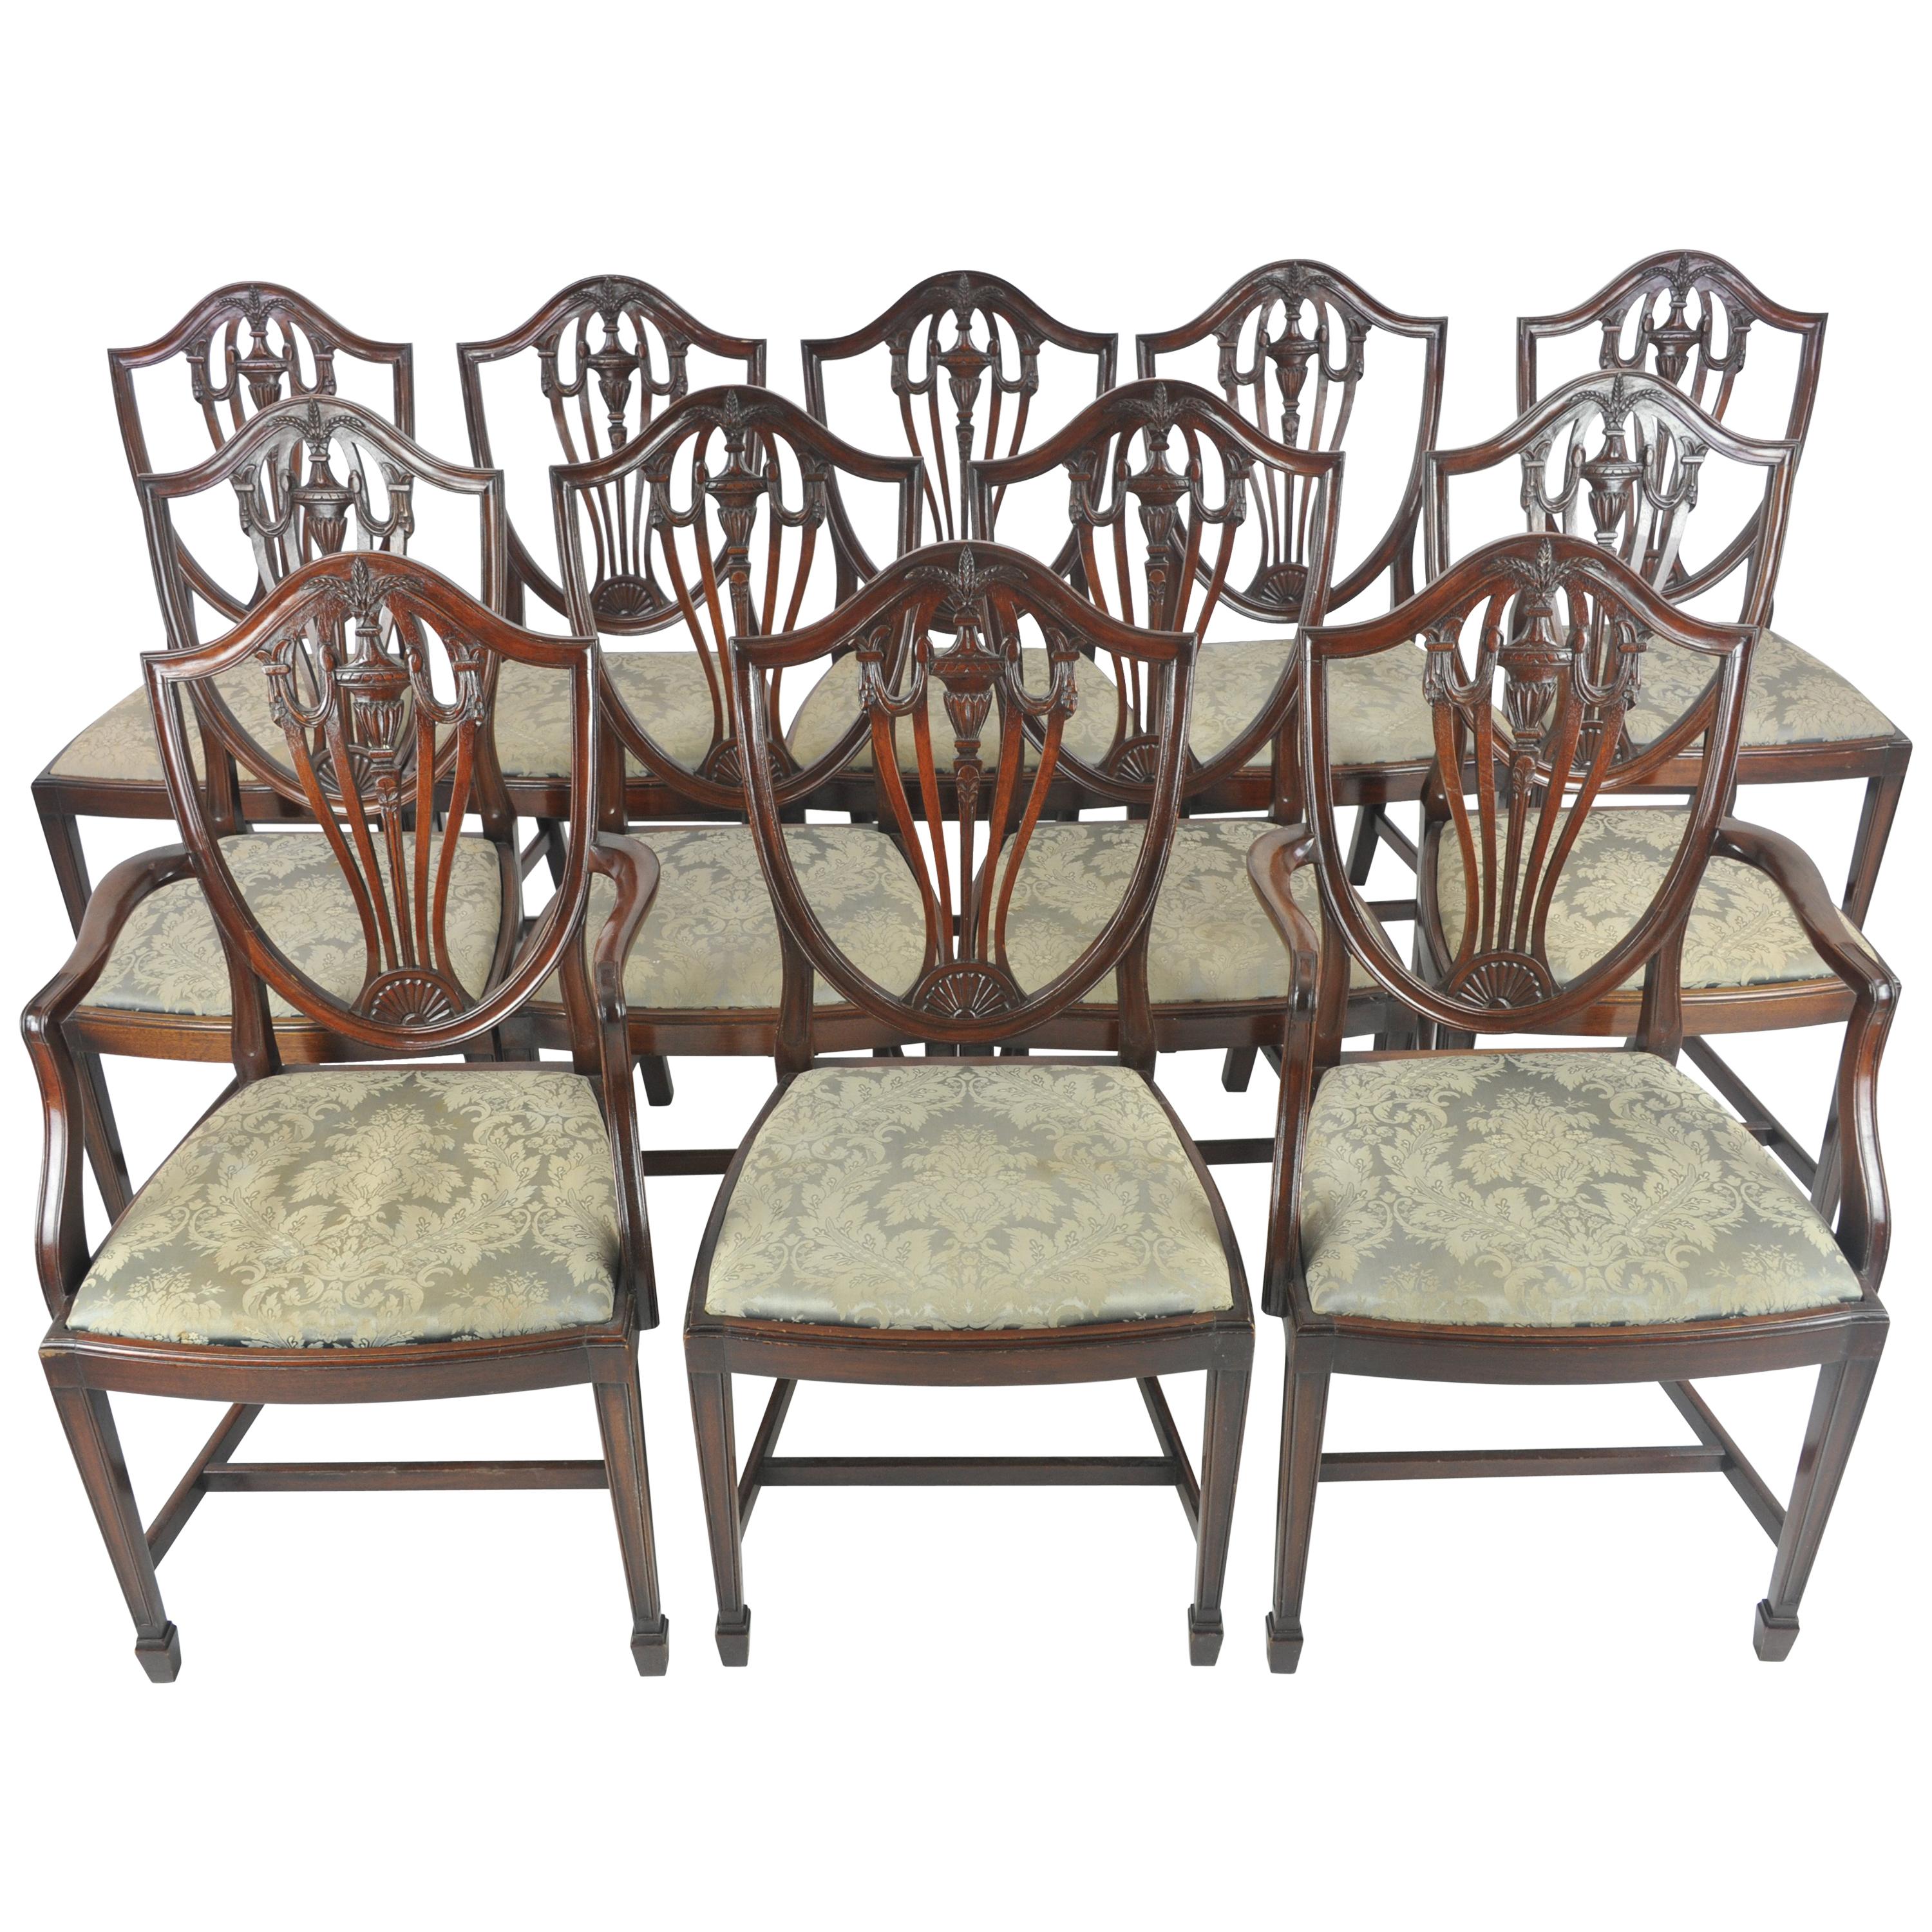 Twelve Dining Chairs, Antique Dining Chairs, Hepplewhite Chairs, Walnut, B1071